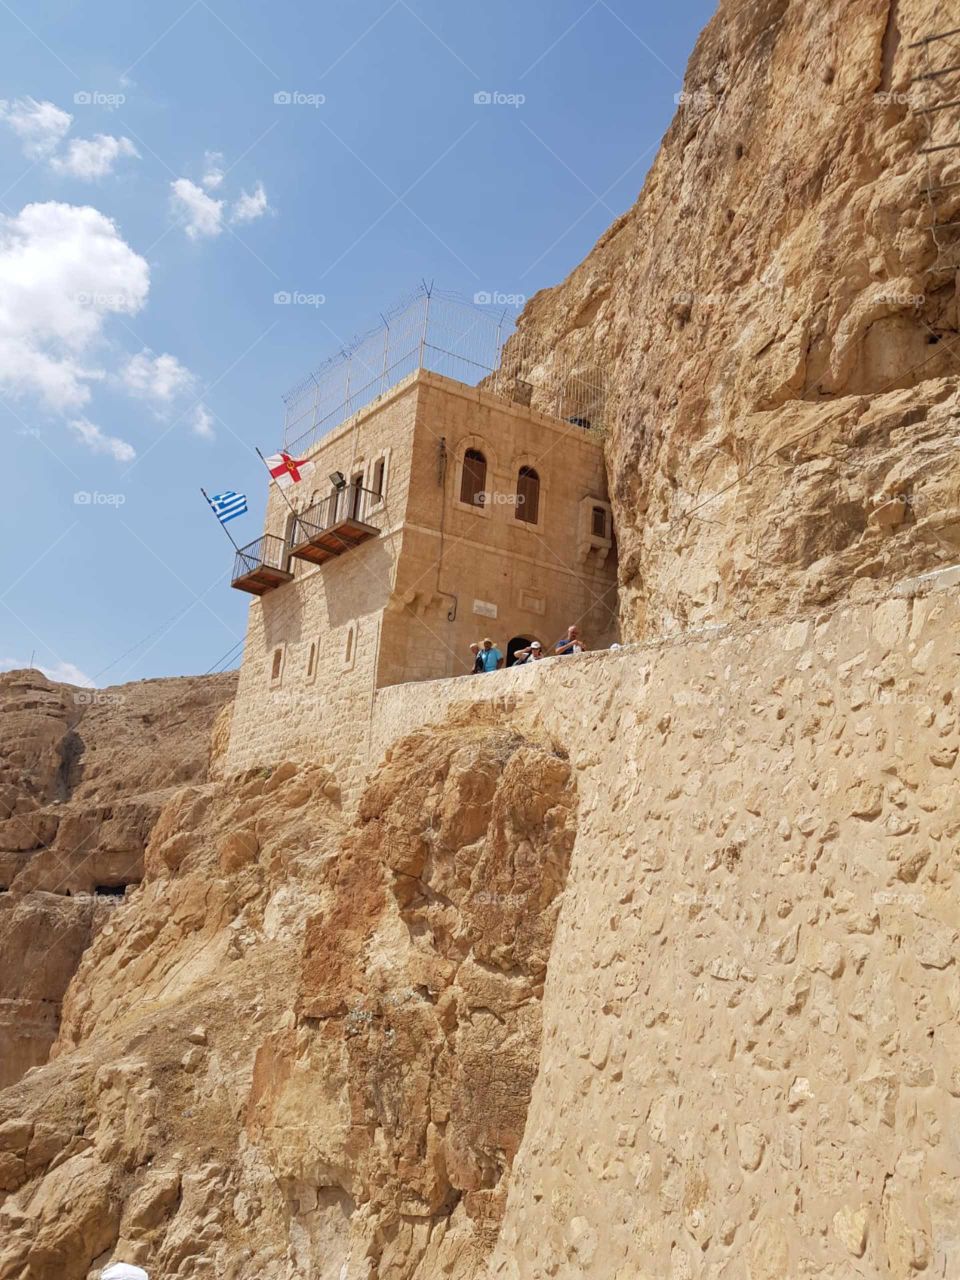 Mount of temptations where Jesus fasted for 40 days and 40 nights